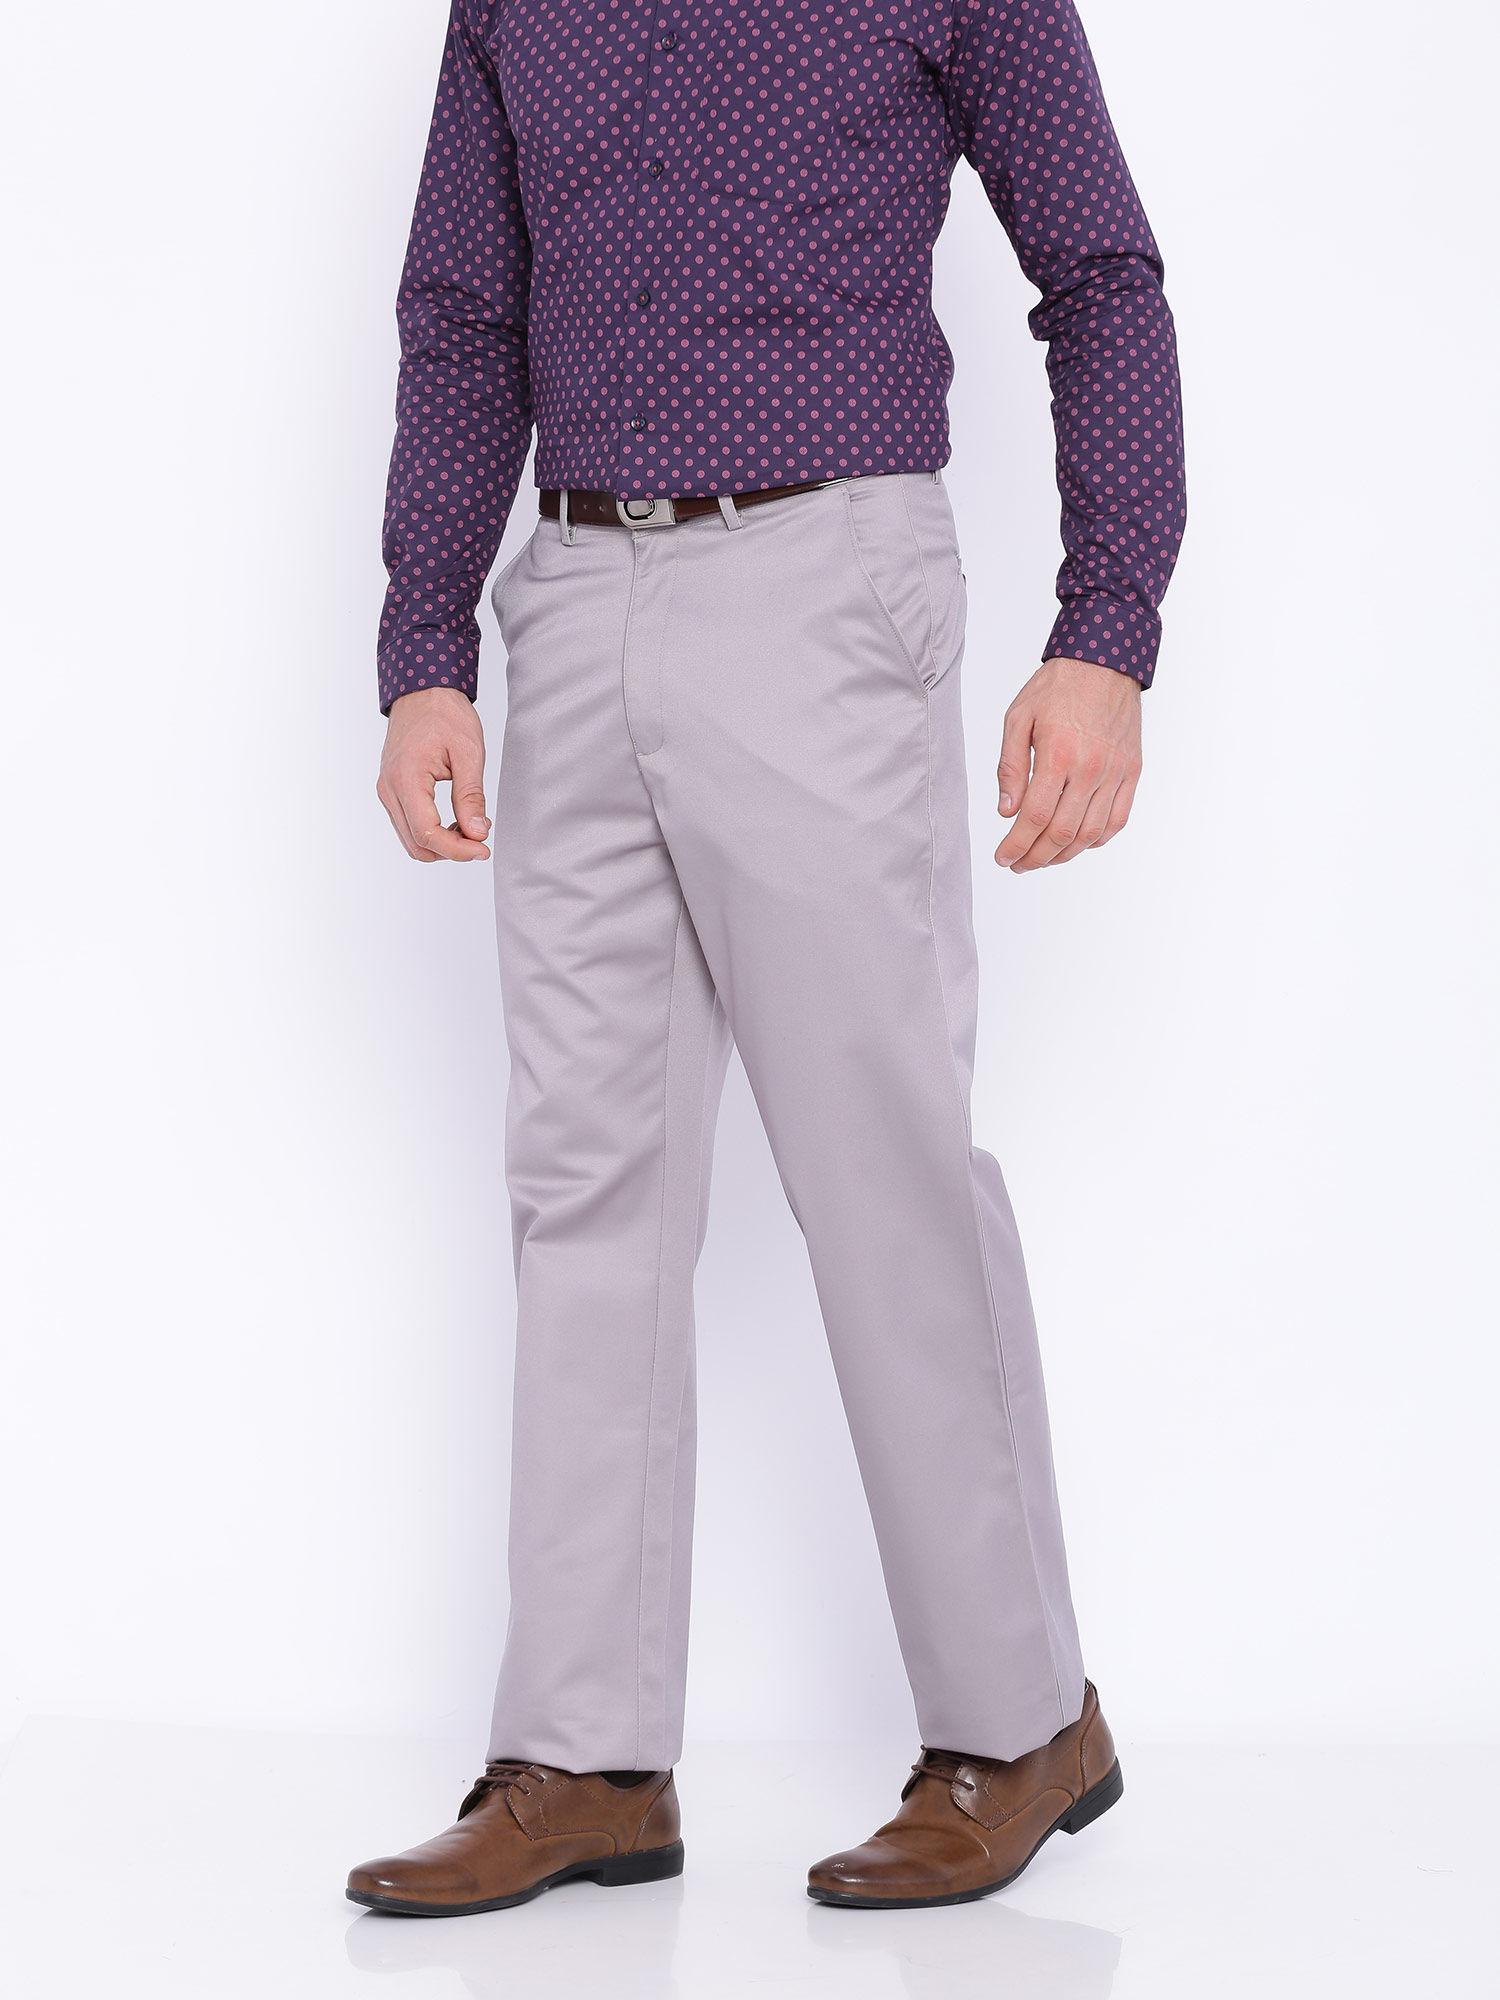 comfort-fit-grey-satin-weave-poly-cotton-trousers